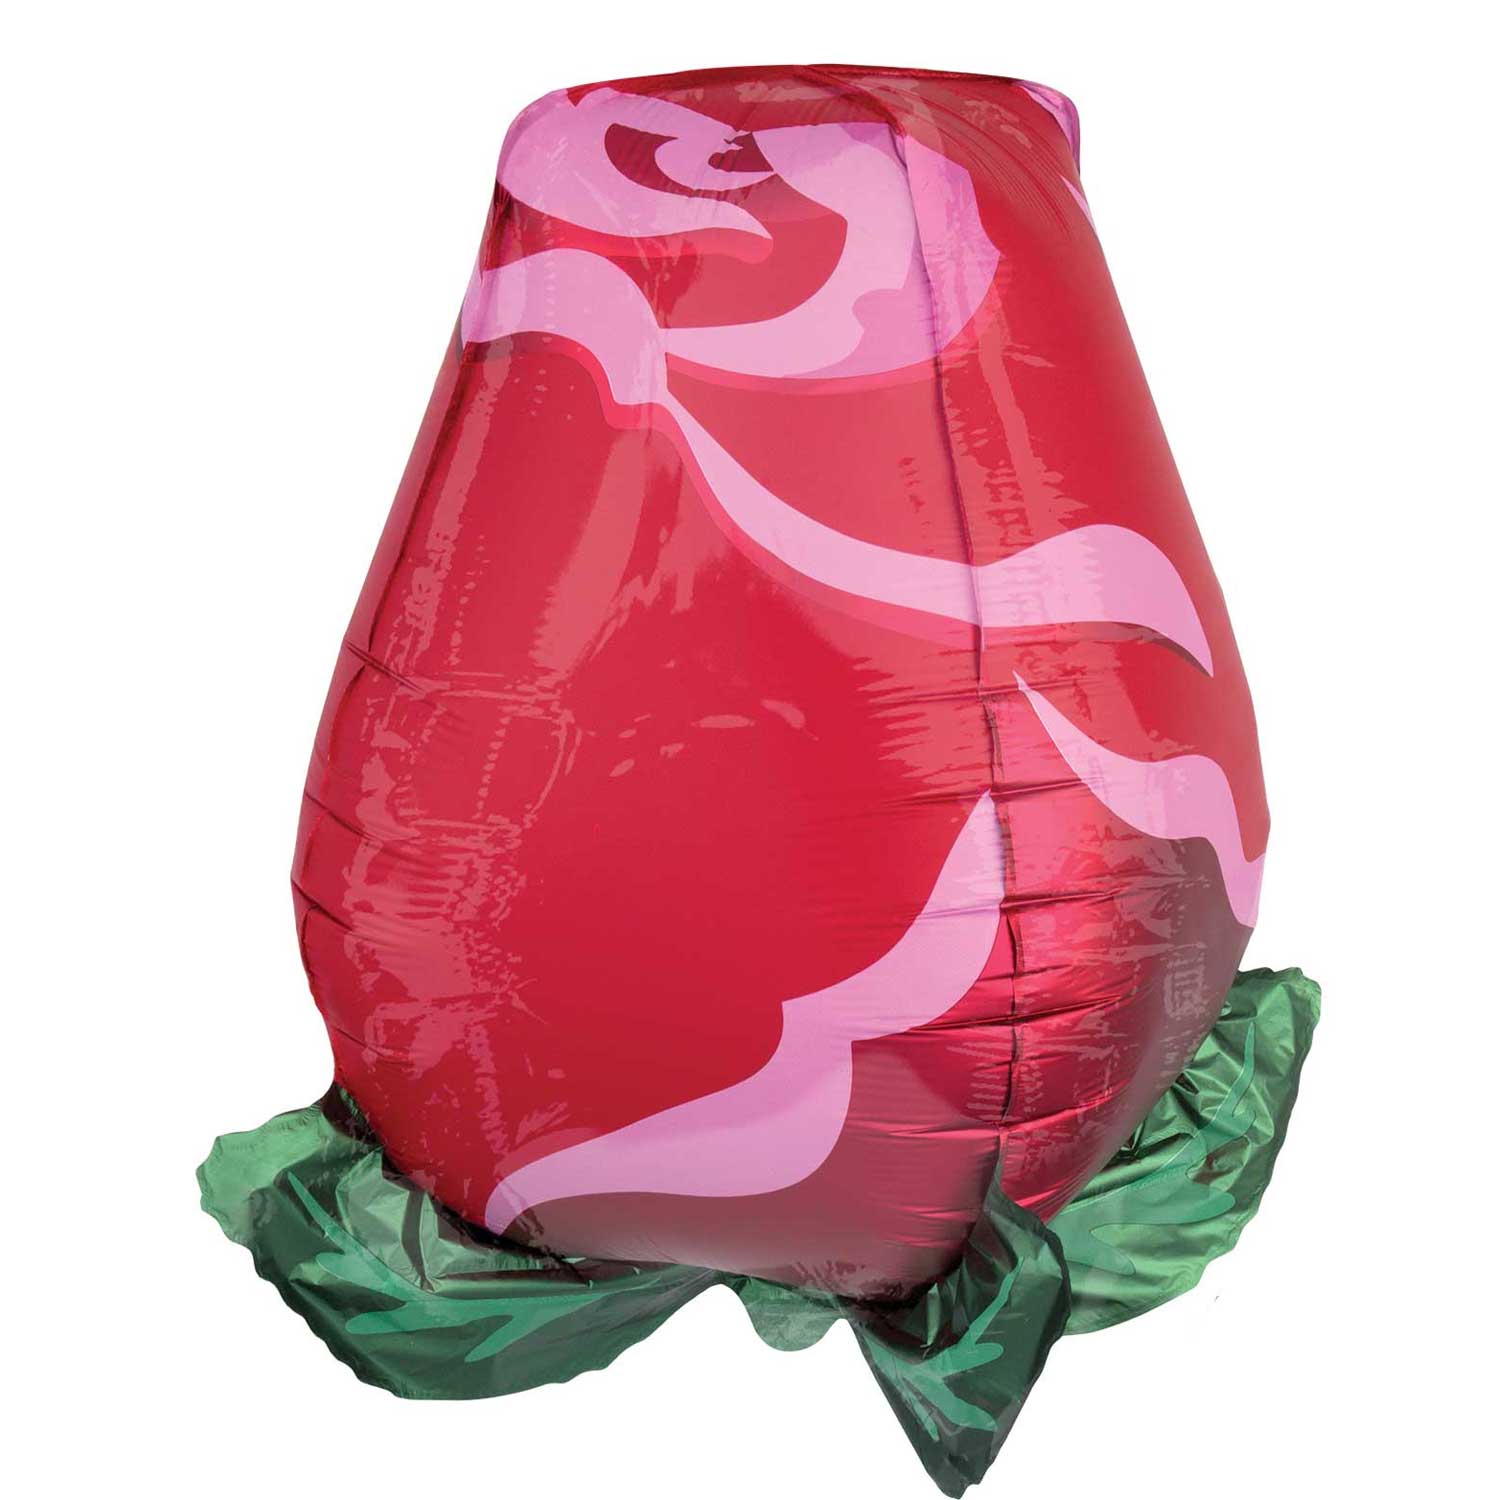 Red Rose Bud UltraShape Balloon 43x55cm Balloons & Streamers - Party Centre - Party Centre